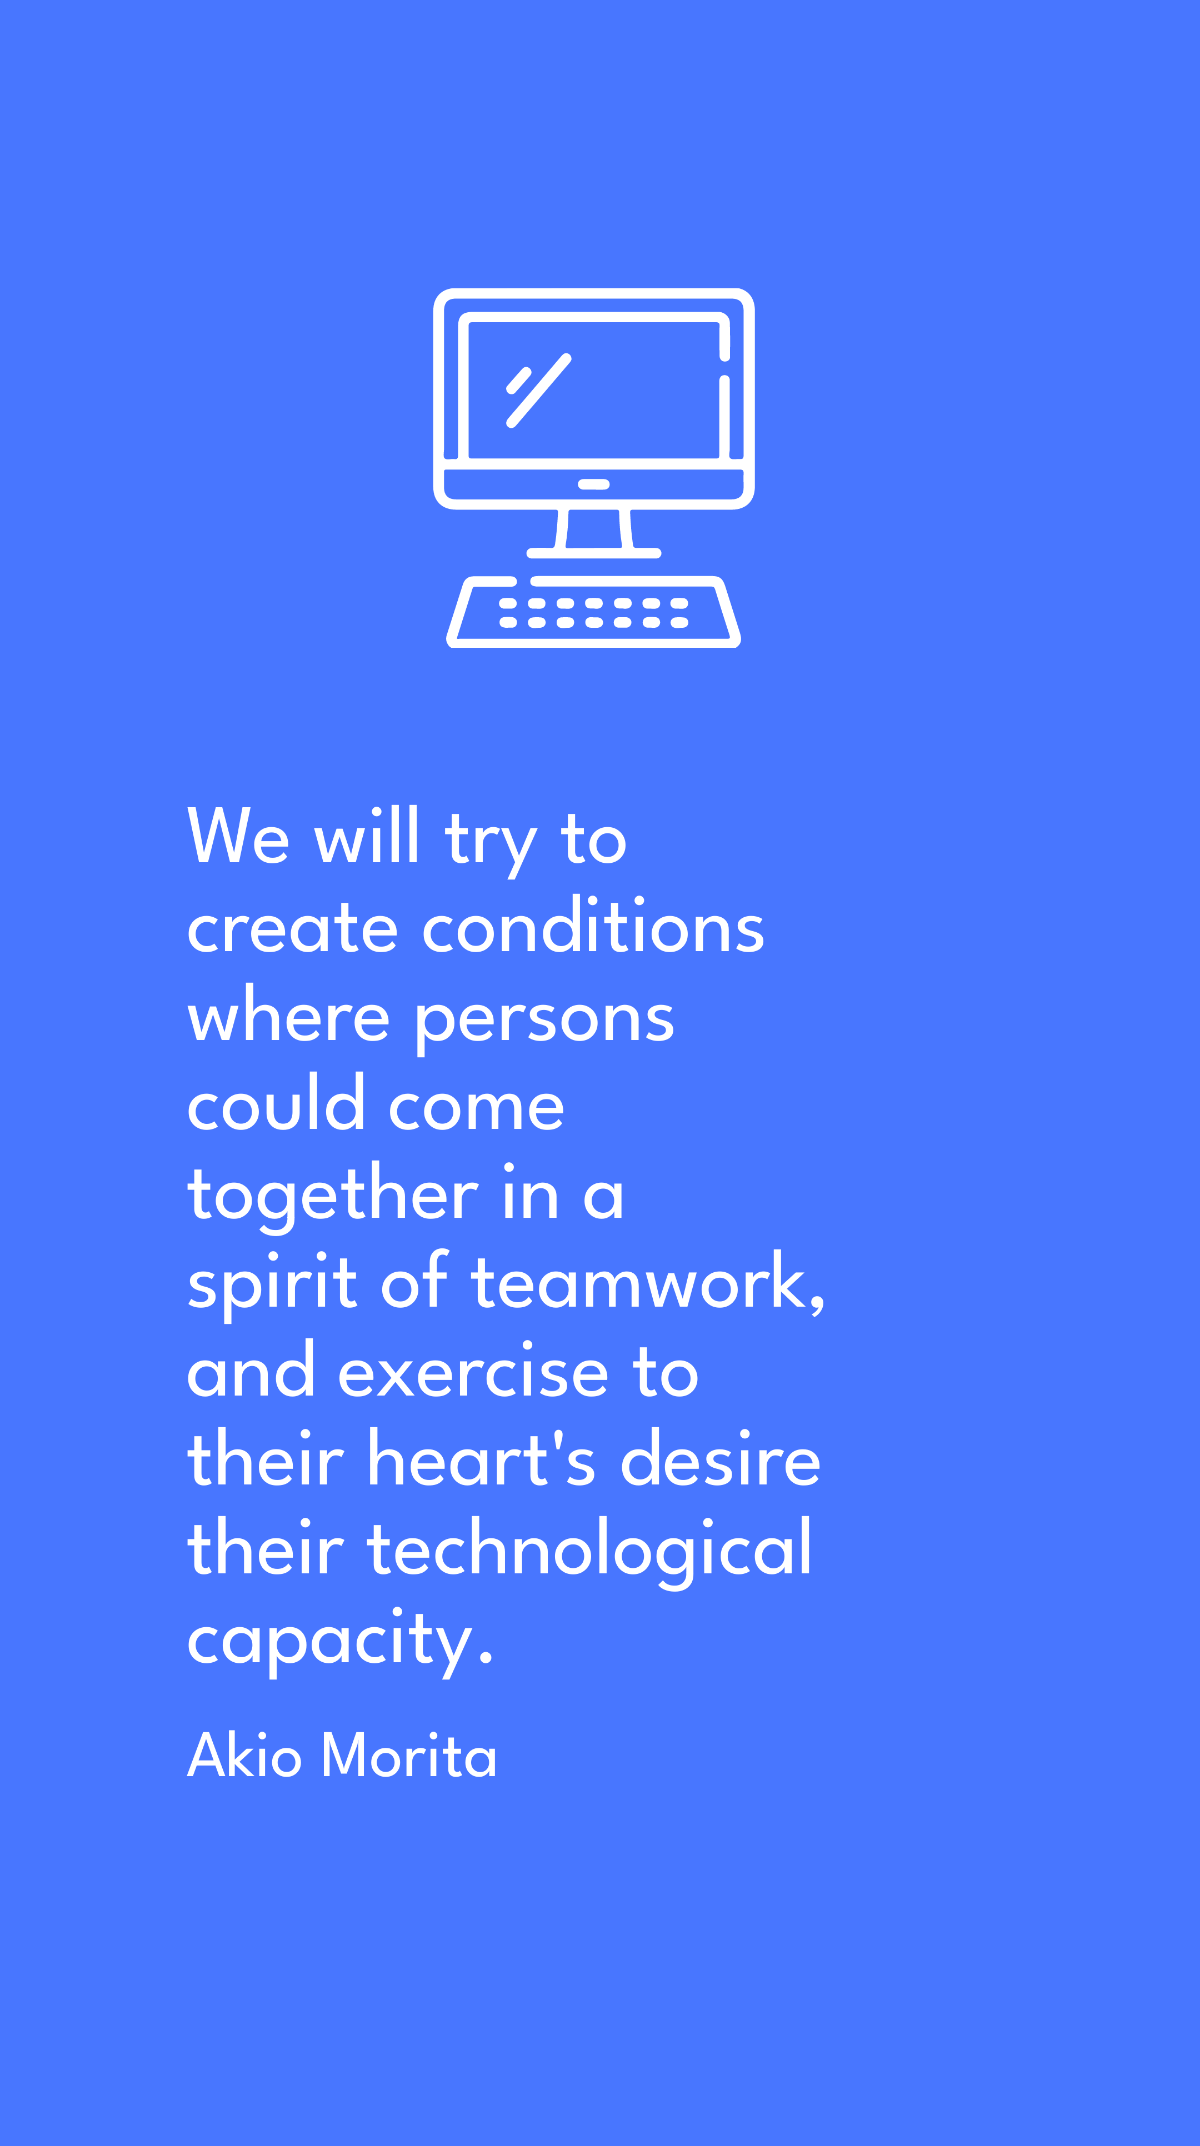 Free Akio Morita - We will try to create conditions where persons could come together in a spirit of teamwork, and exercise to their heart's desire their technological capacity. Template